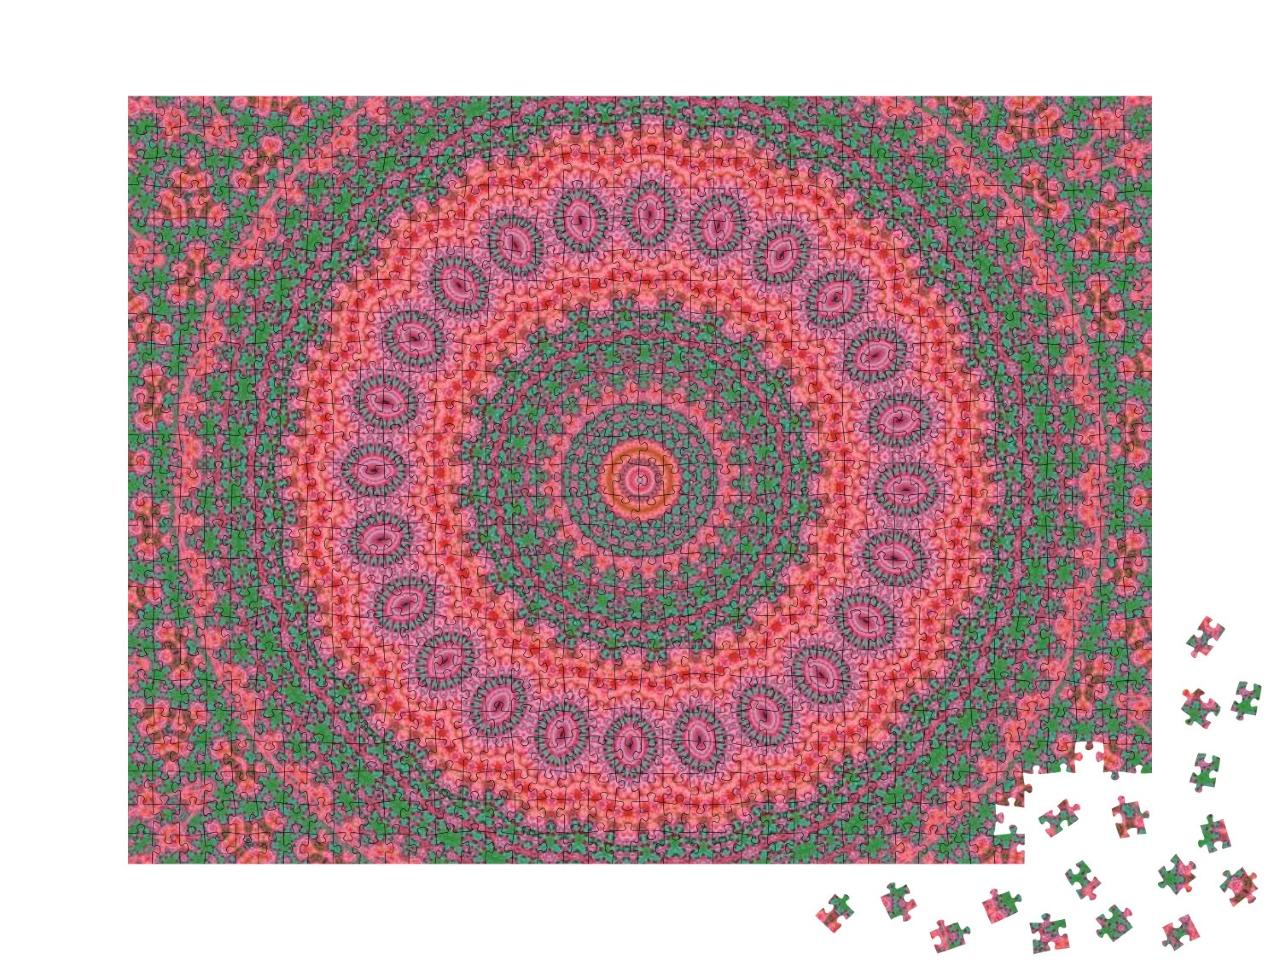 A Magenta Hot Pink & Lime Green Chartreuse Mandala Patter... Jigsaw Puzzle with 1000 pieces